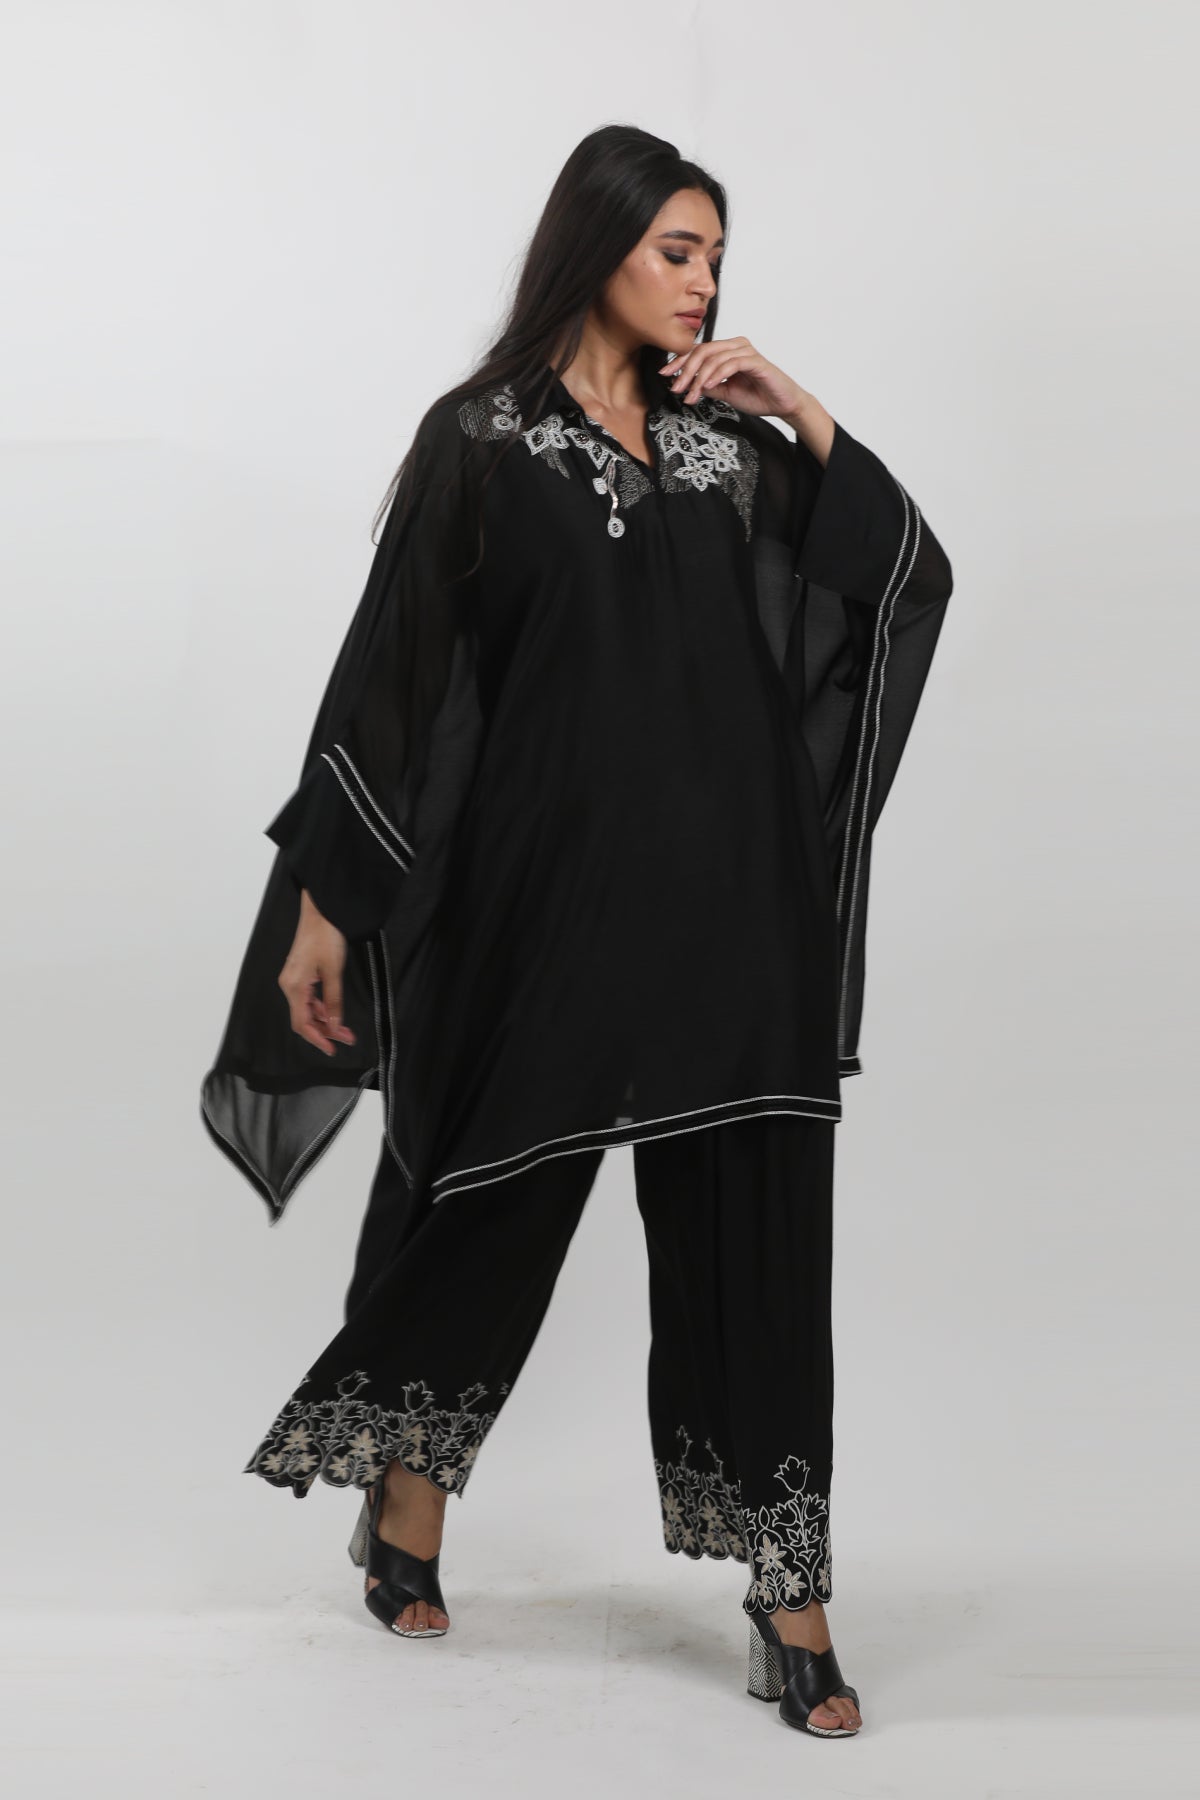 Black Cape Tunic with hand embroiderey around collar & black lace trim details